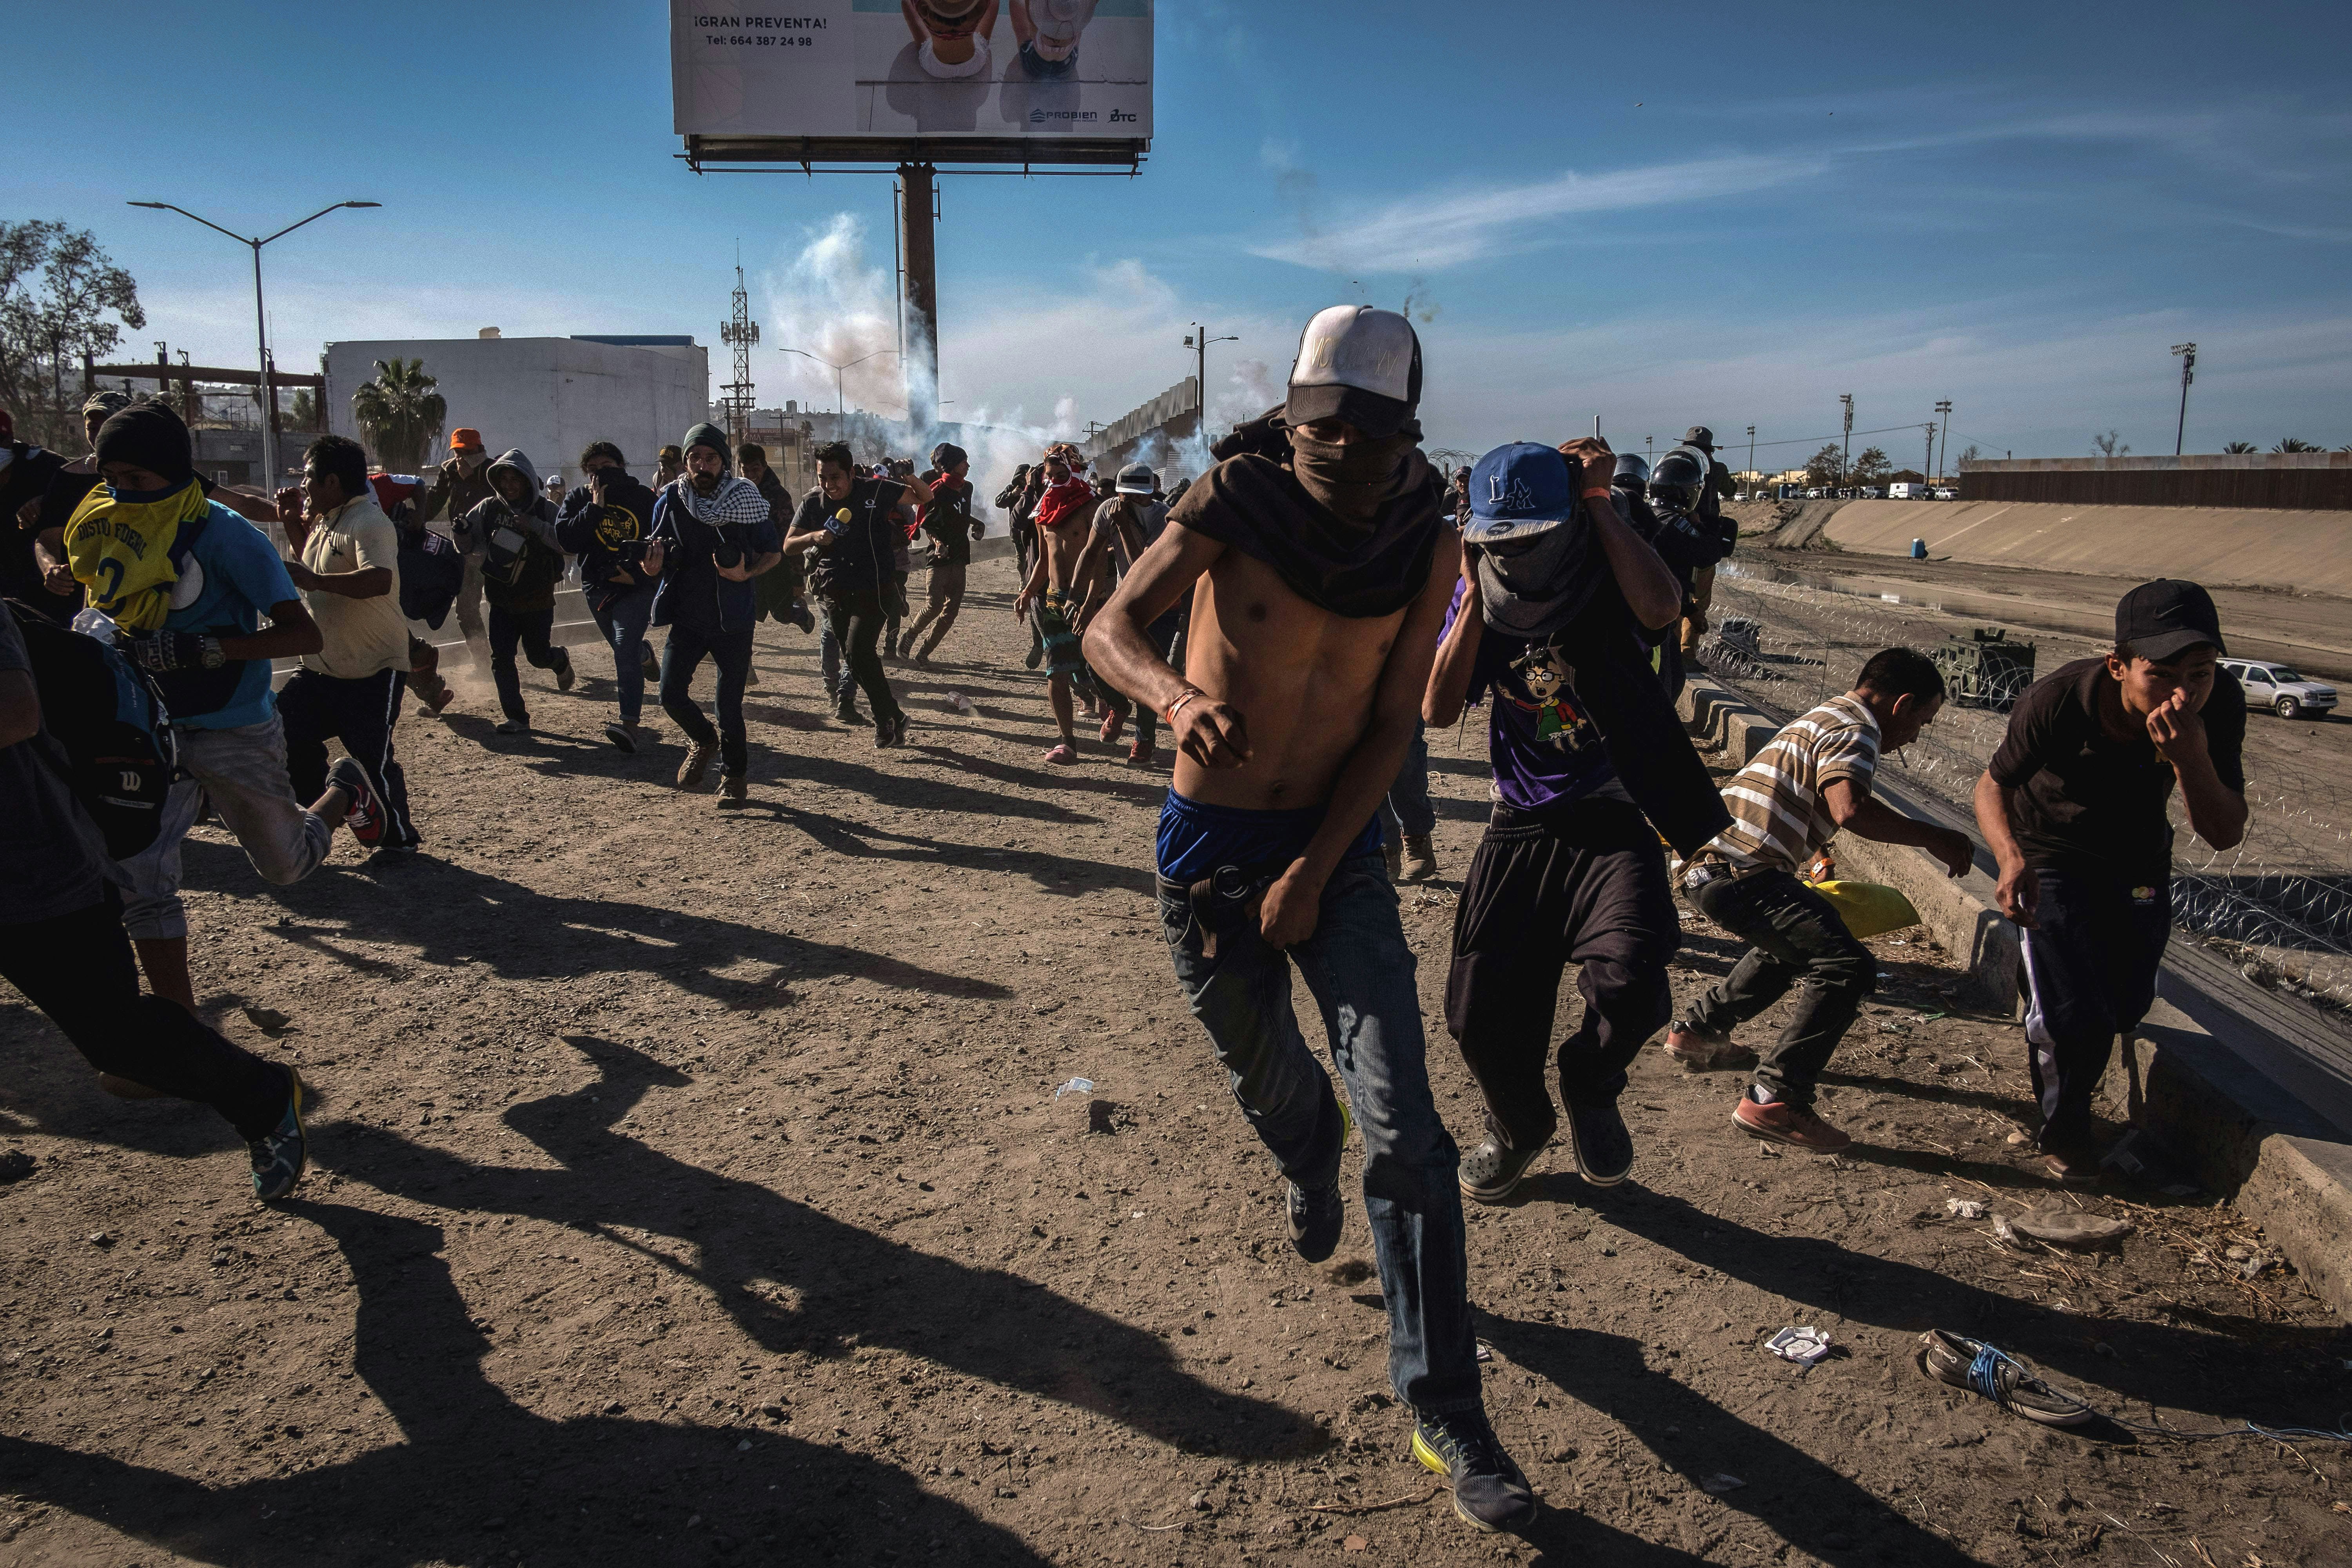 TOPSHOT - Central American migrants -mostly Hondurans- run along the Tijuana River near the El Chaparral border crossing in Tijuana, Baja California State, Mexico, near US-Mexico border, after the US border patrol threw tear gas from the distance to disperse them after an alleged verbal dispute, on November 25, 2018. - US officials closed the San Ysidro crossing point in southern California on Sunday after hundreds of migrants, part of the "caravan" condemned by President Donald Trump, tried to breach a fence from Tijuana, authorities announced. (Photo by GUILLERMO ARIAS / AFP)        (Photo credit should read GUILLERMO ARIAS/AFP via Getty Images)